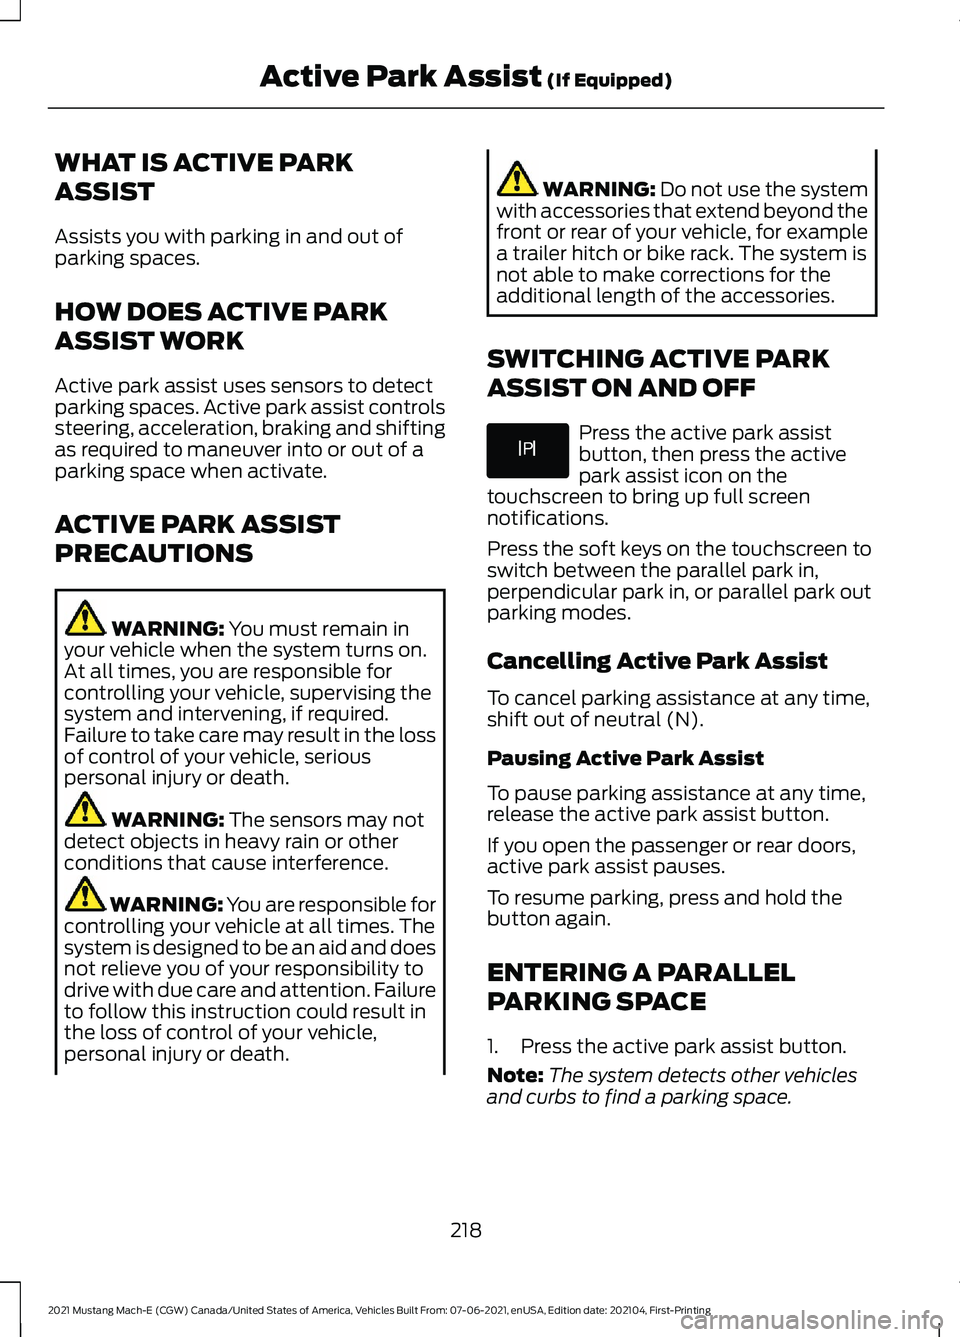 FORD MUSTANG MACH-E 2021  Owners Manual WHAT IS ACTIVE PARK
ASSIST
Assists you with parking in and out of
parking spaces.
HOW DOES ACTIVE PARK
ASSIST WORK
Active park assist uses sensors to detect
parking spaces. Active park assist controls